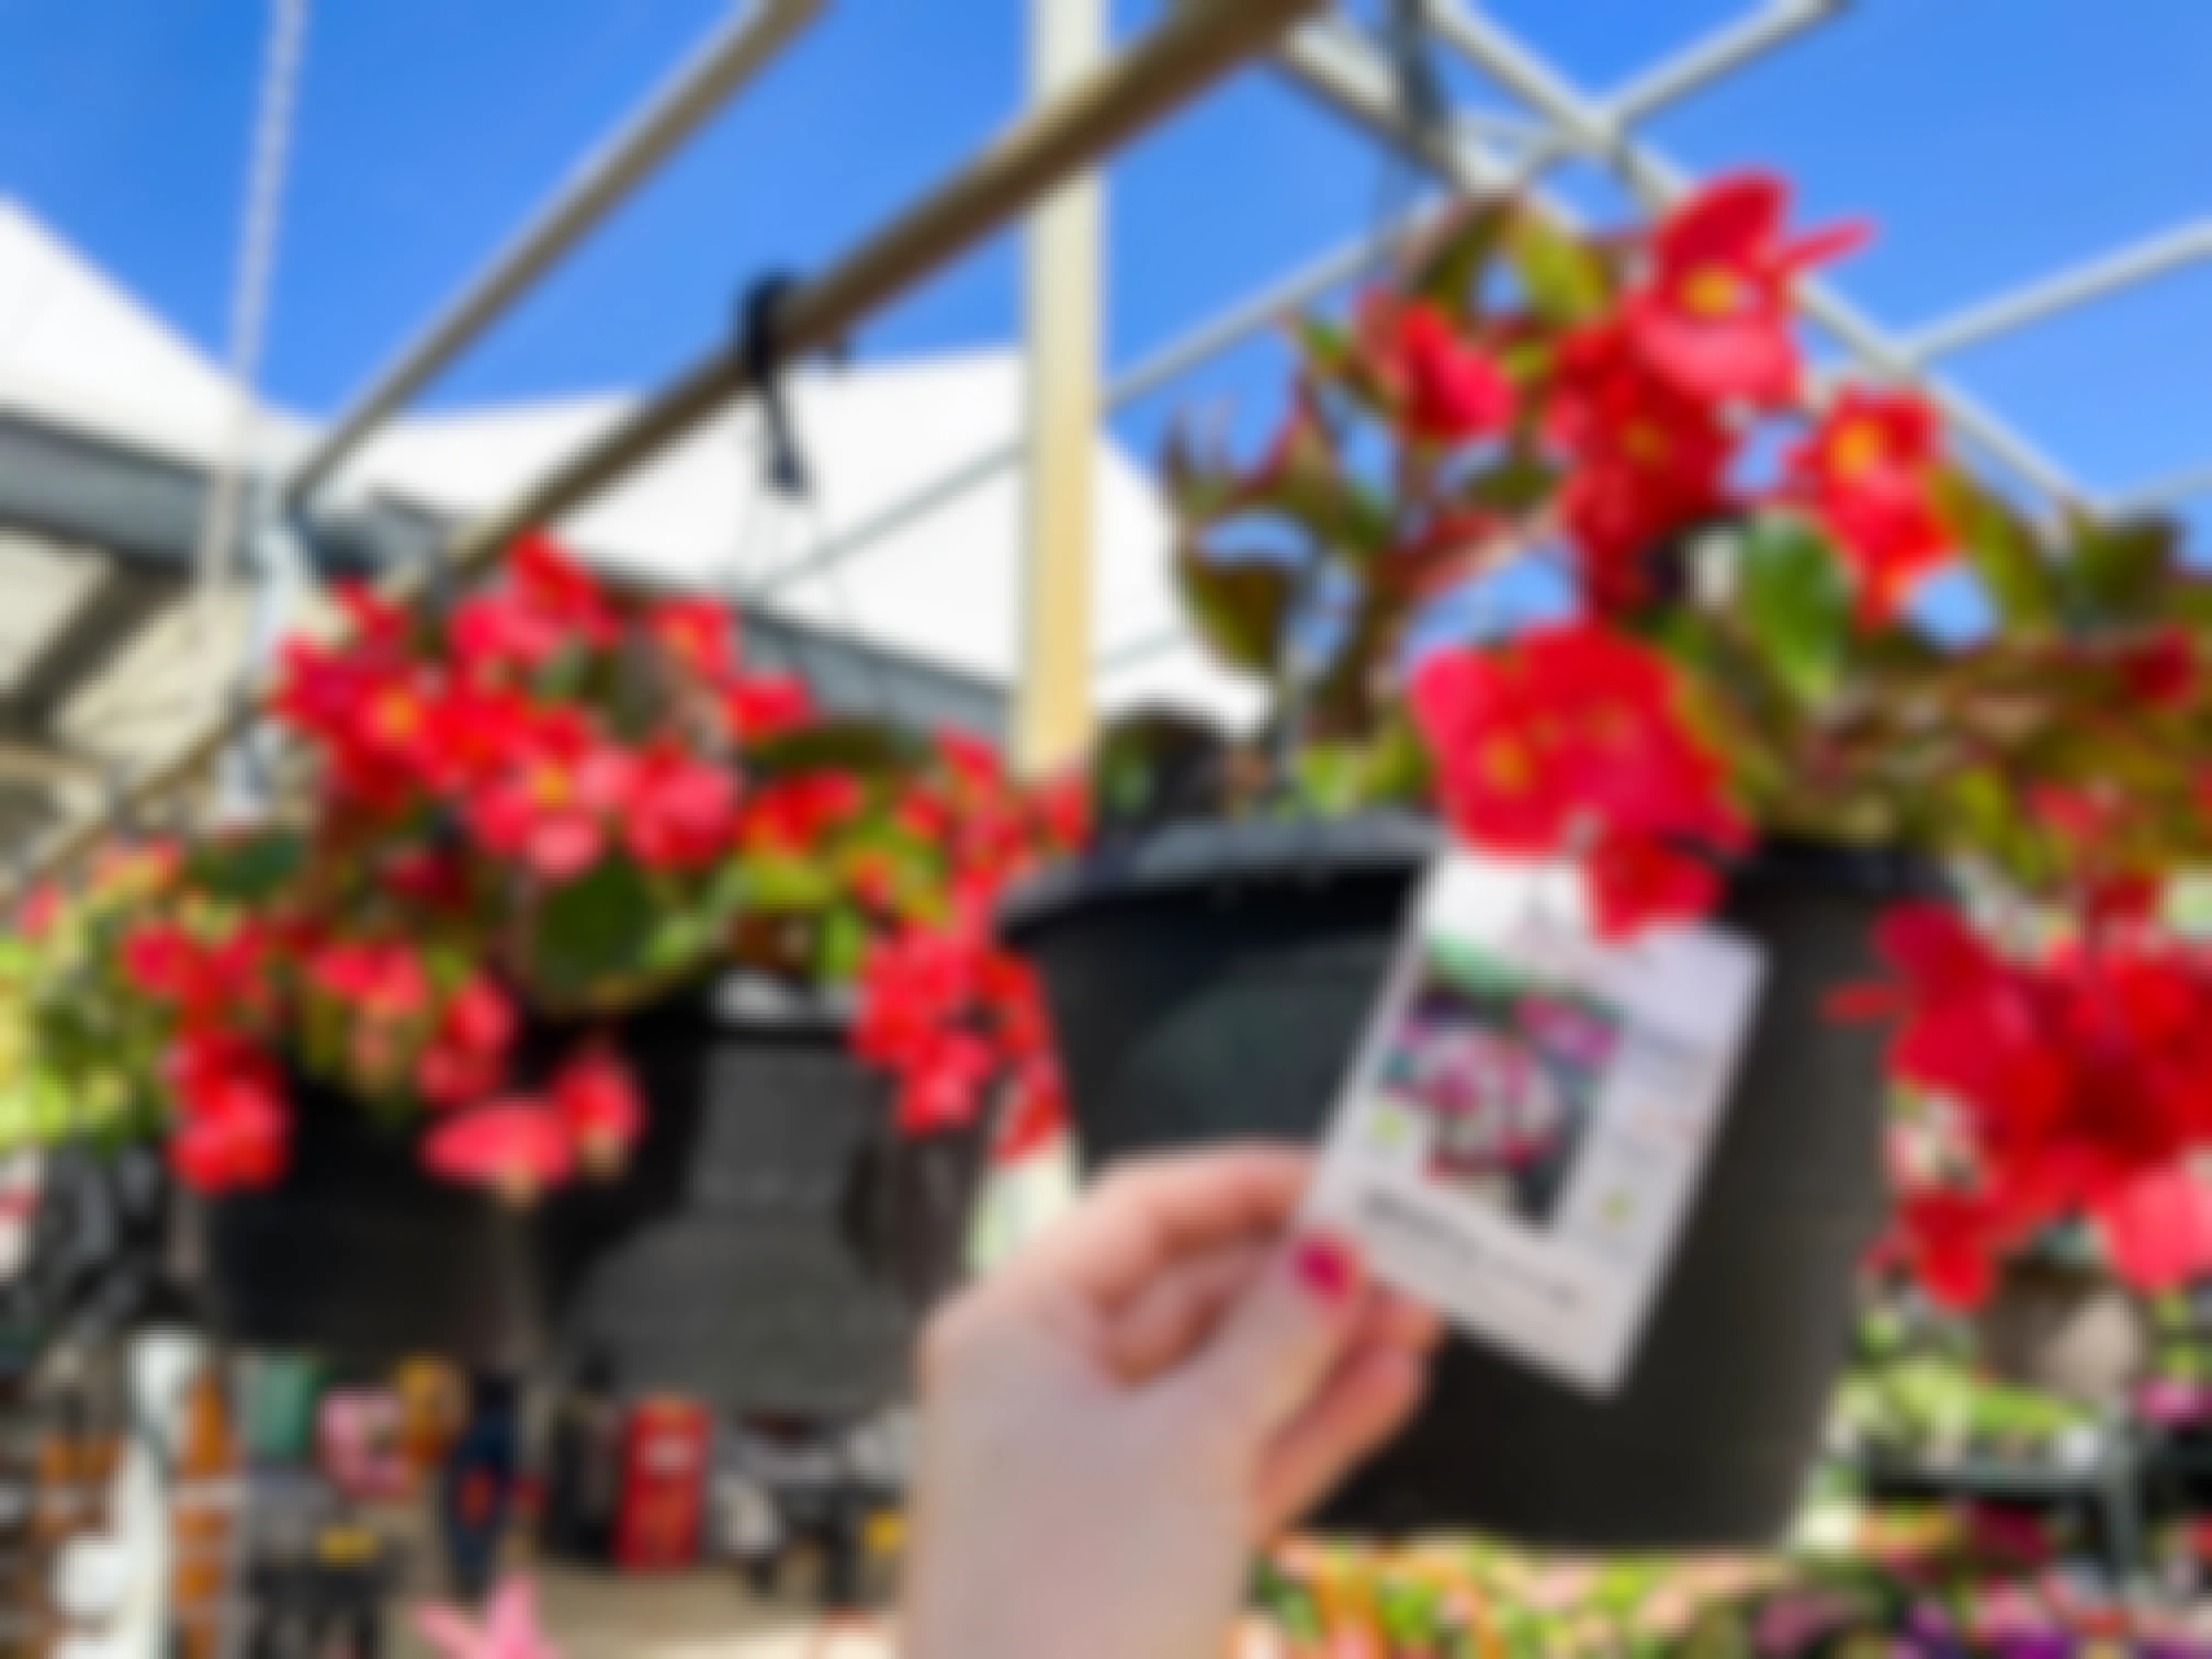 A tag on a hanging flower basket with red Begonias that shows a price of $12.98